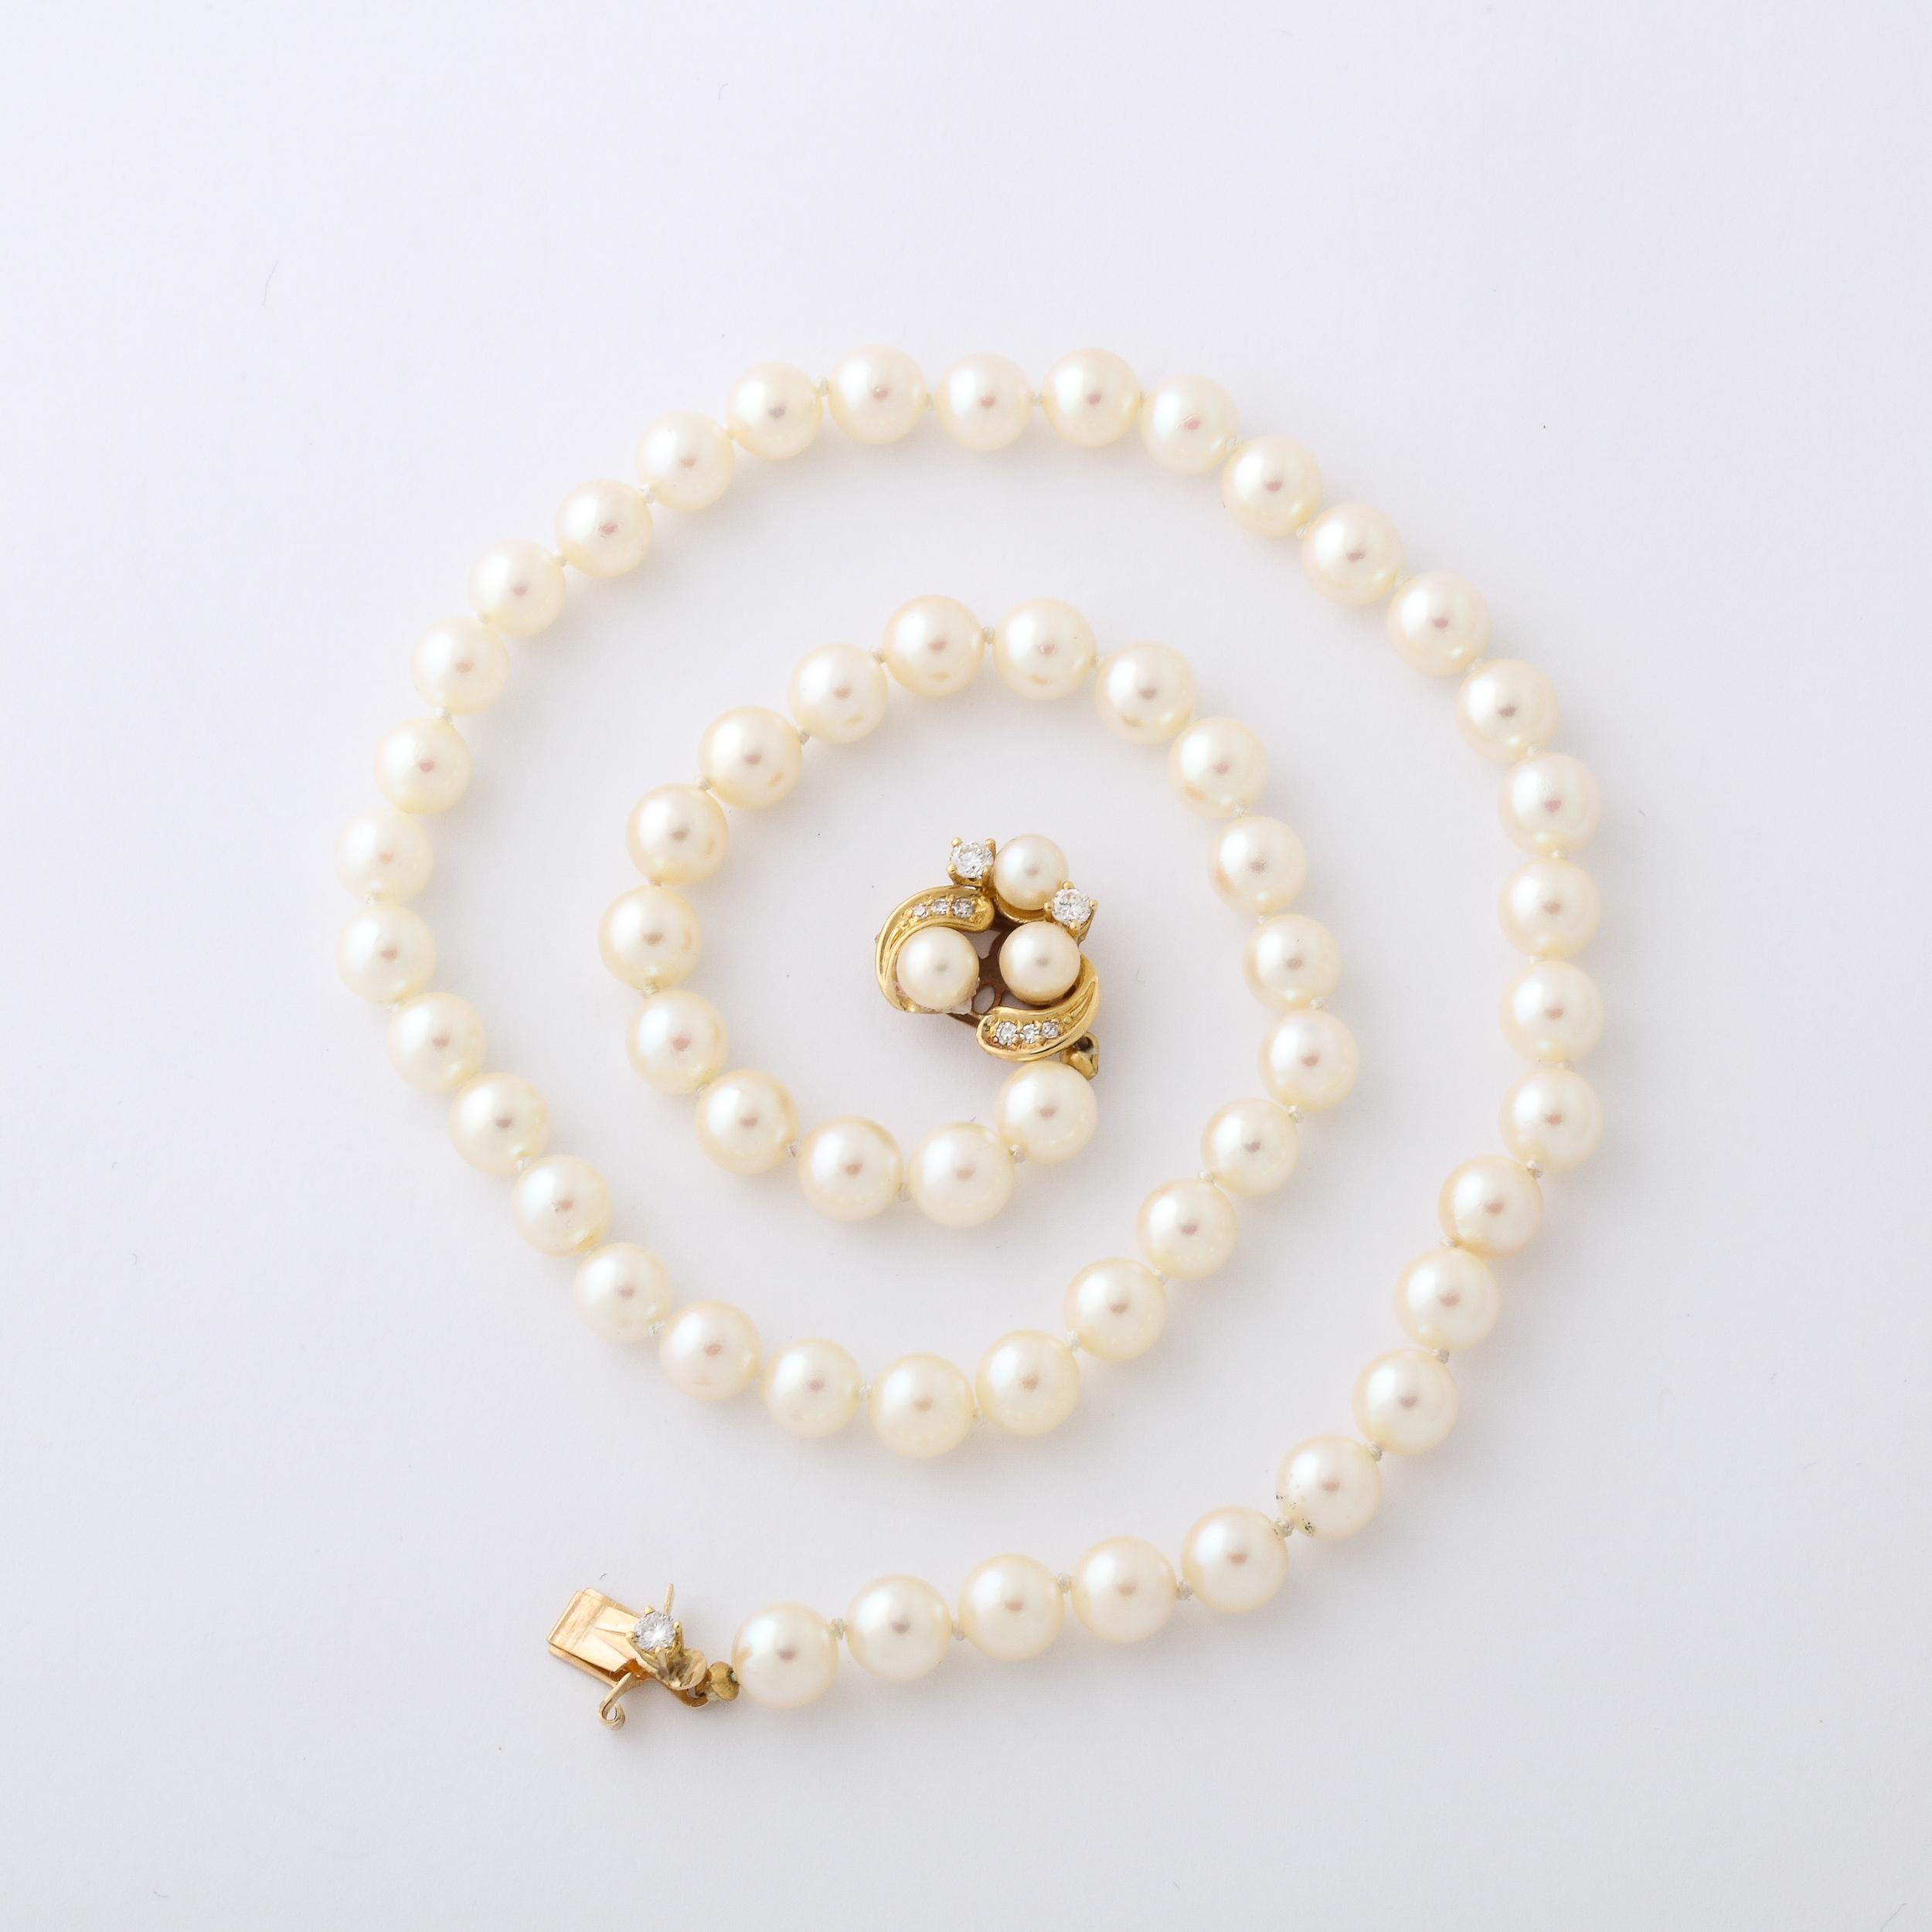 Modernist Pearl Necklace with 14k  Gold , Diamond and Pearl Clasp  9